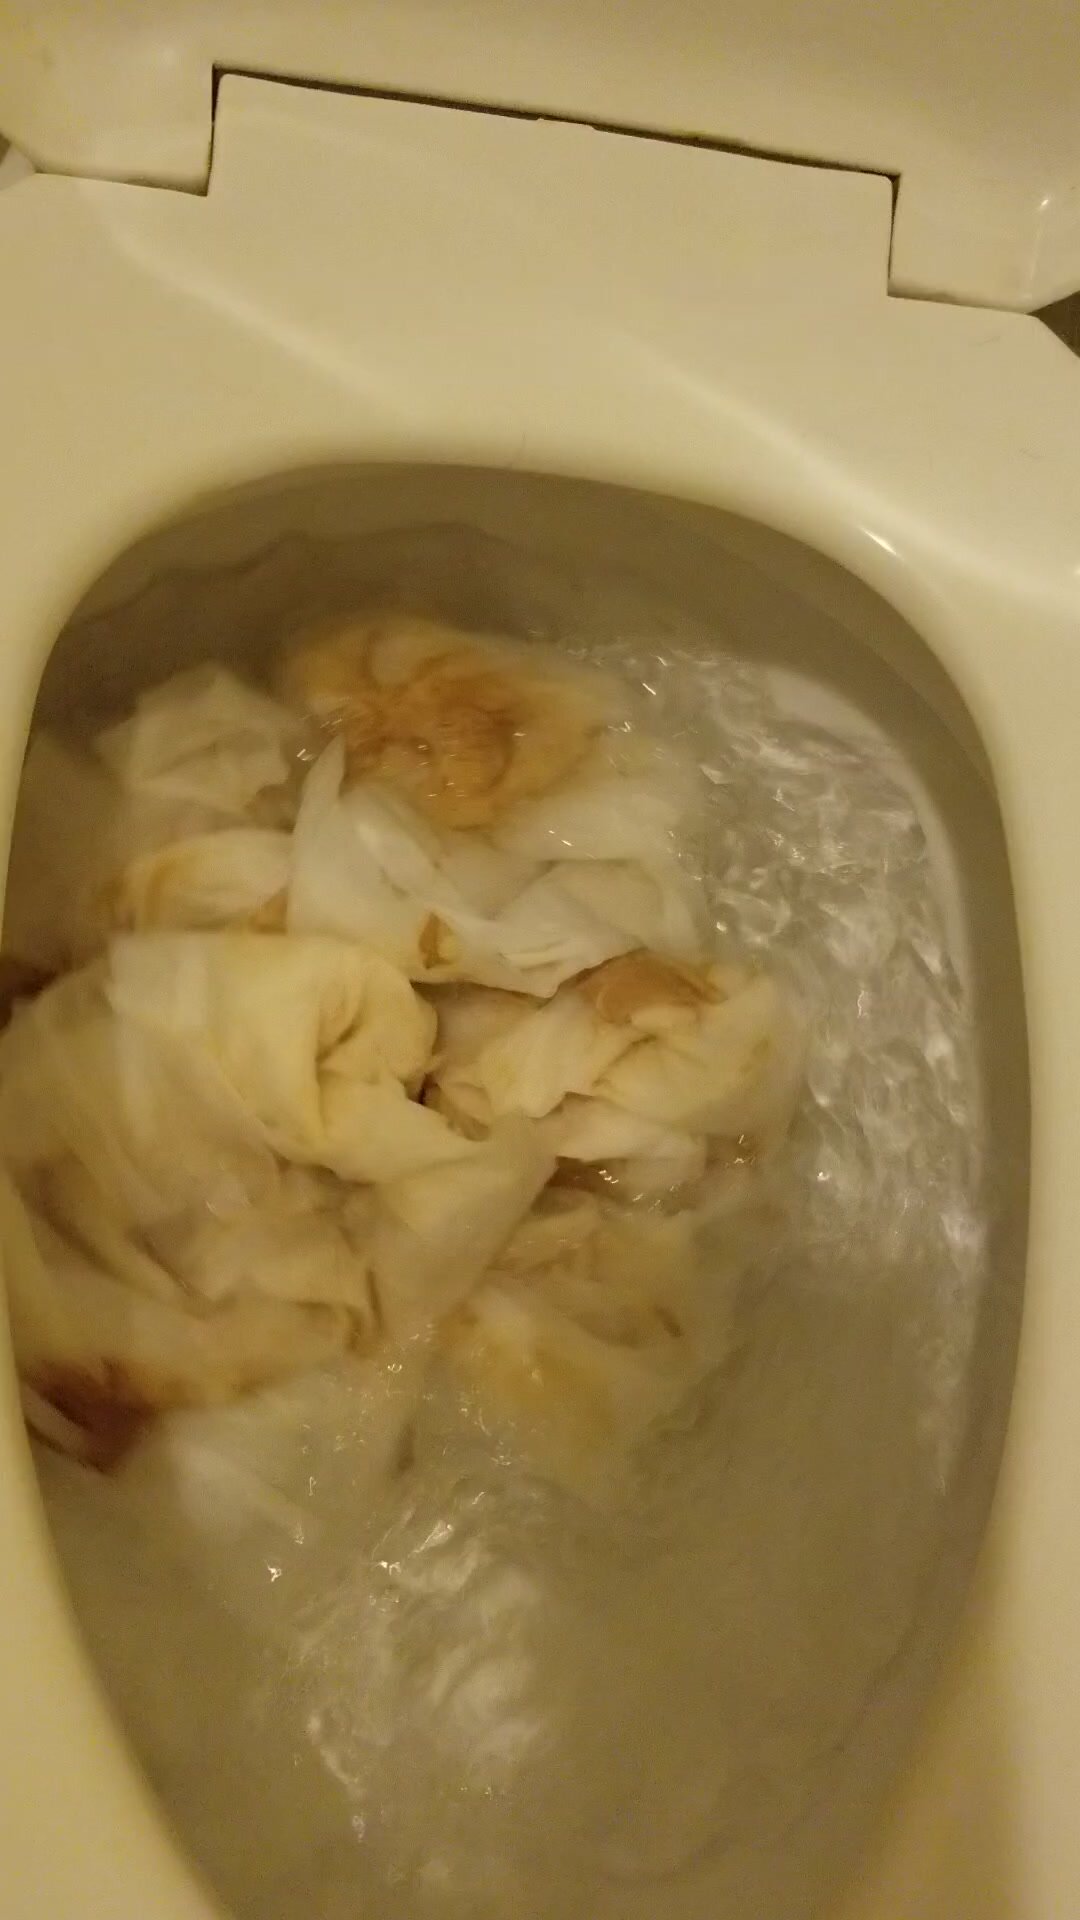 Toilet filled with shitty toilet paper